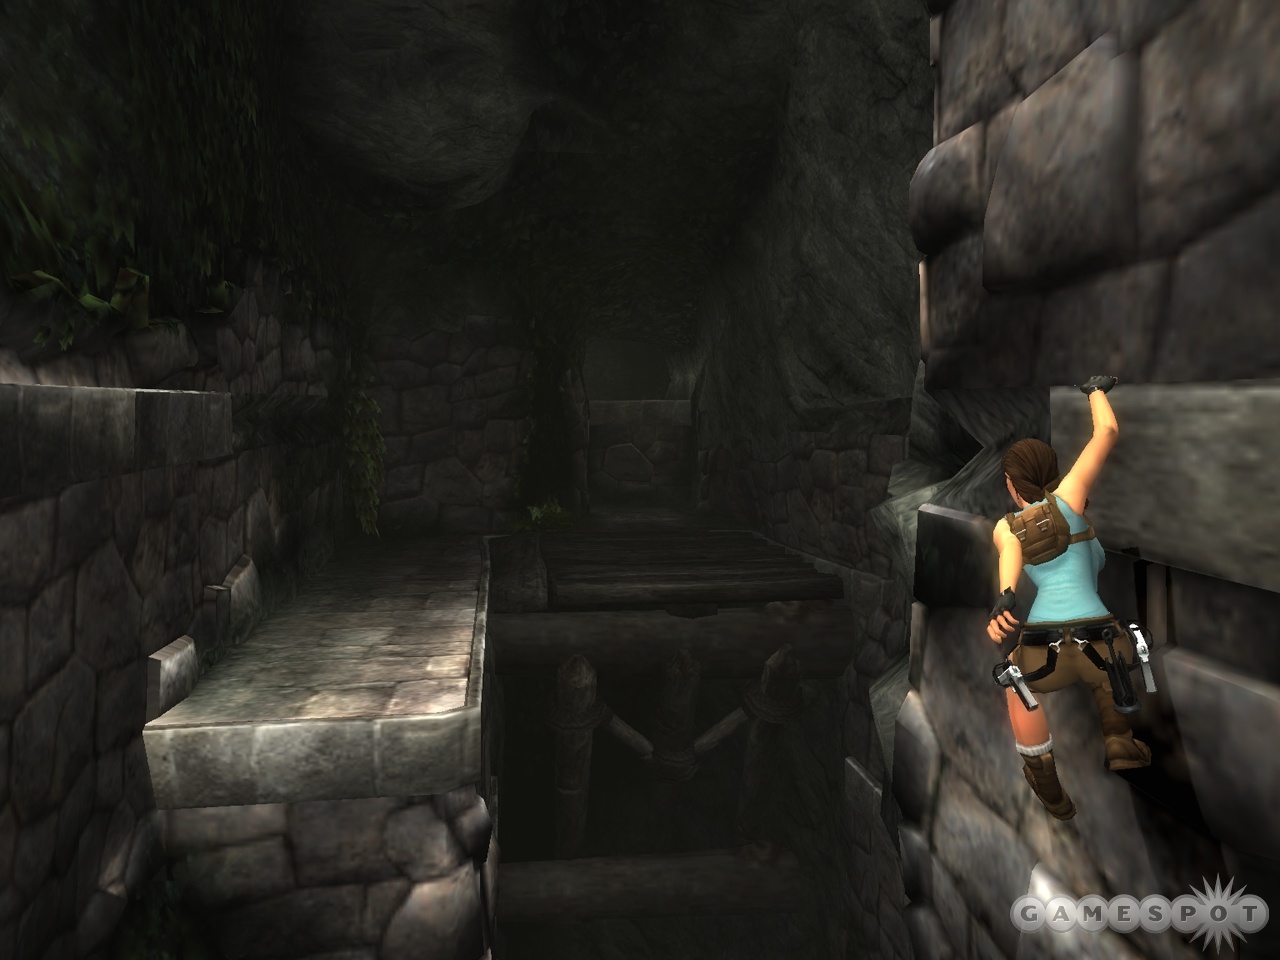 The game will feature new puzzles and content to complement what appeared in the original Tomb Raider.